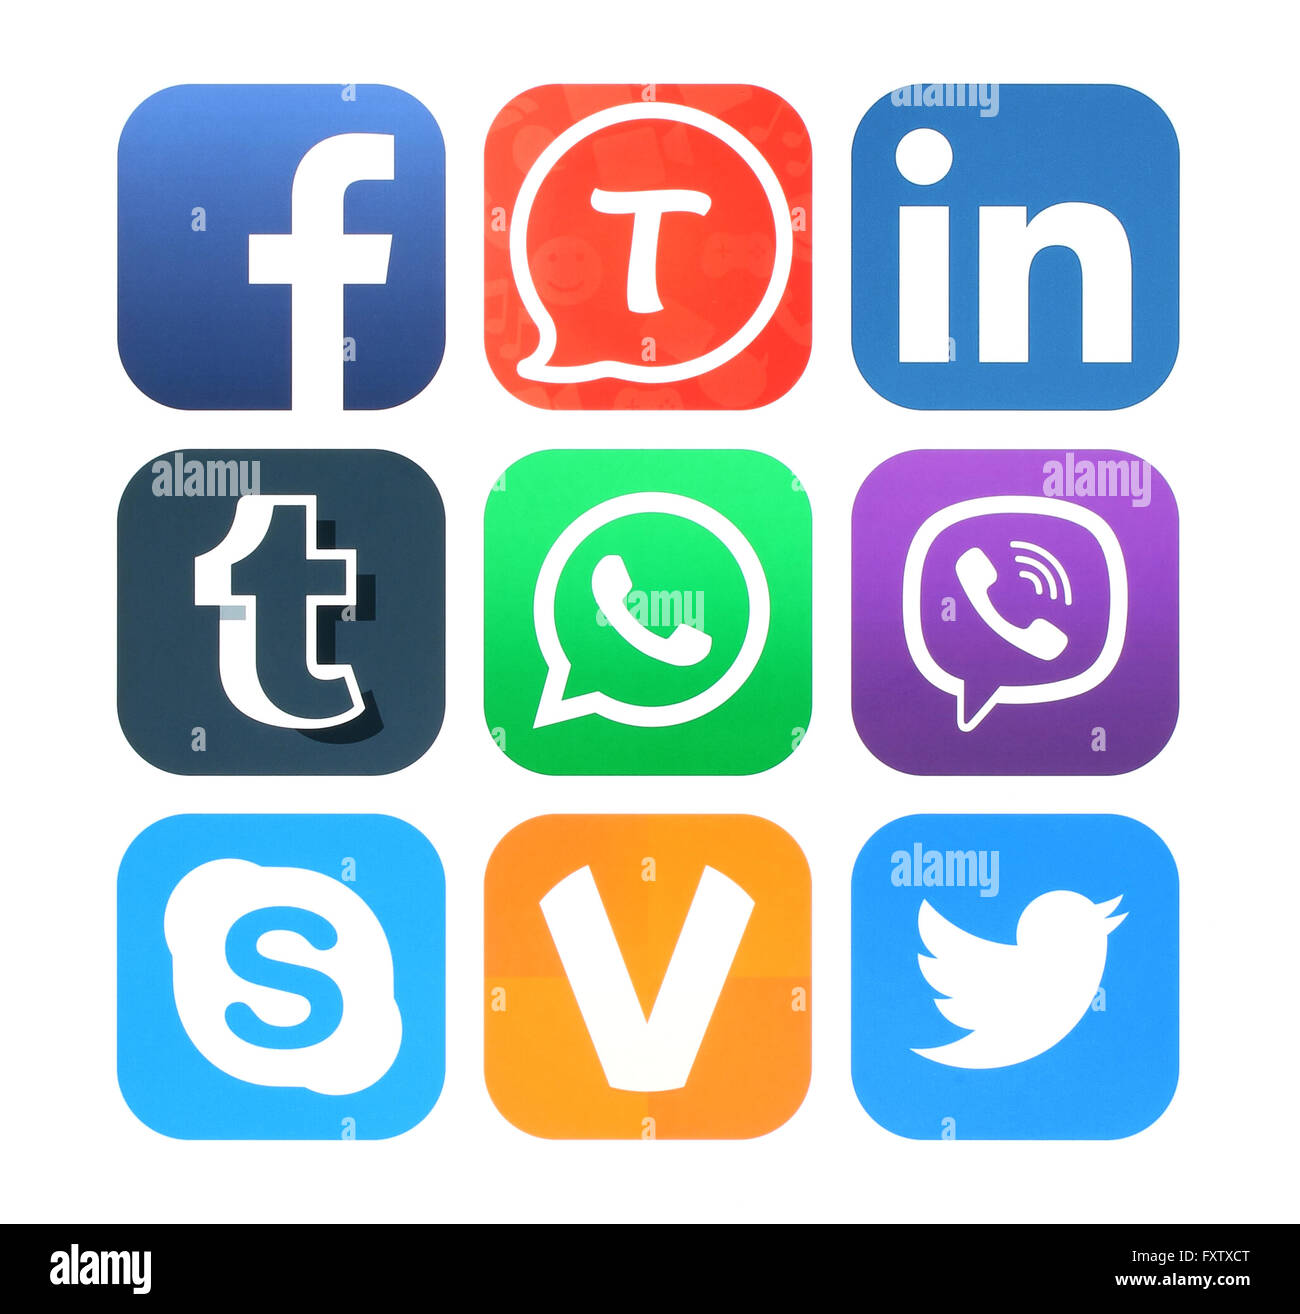 Kiev, Ukraine - February 17, 2016: Collection of popular social networking icons printed on paper: Facebook, Tango, Linkedin Stock Photo